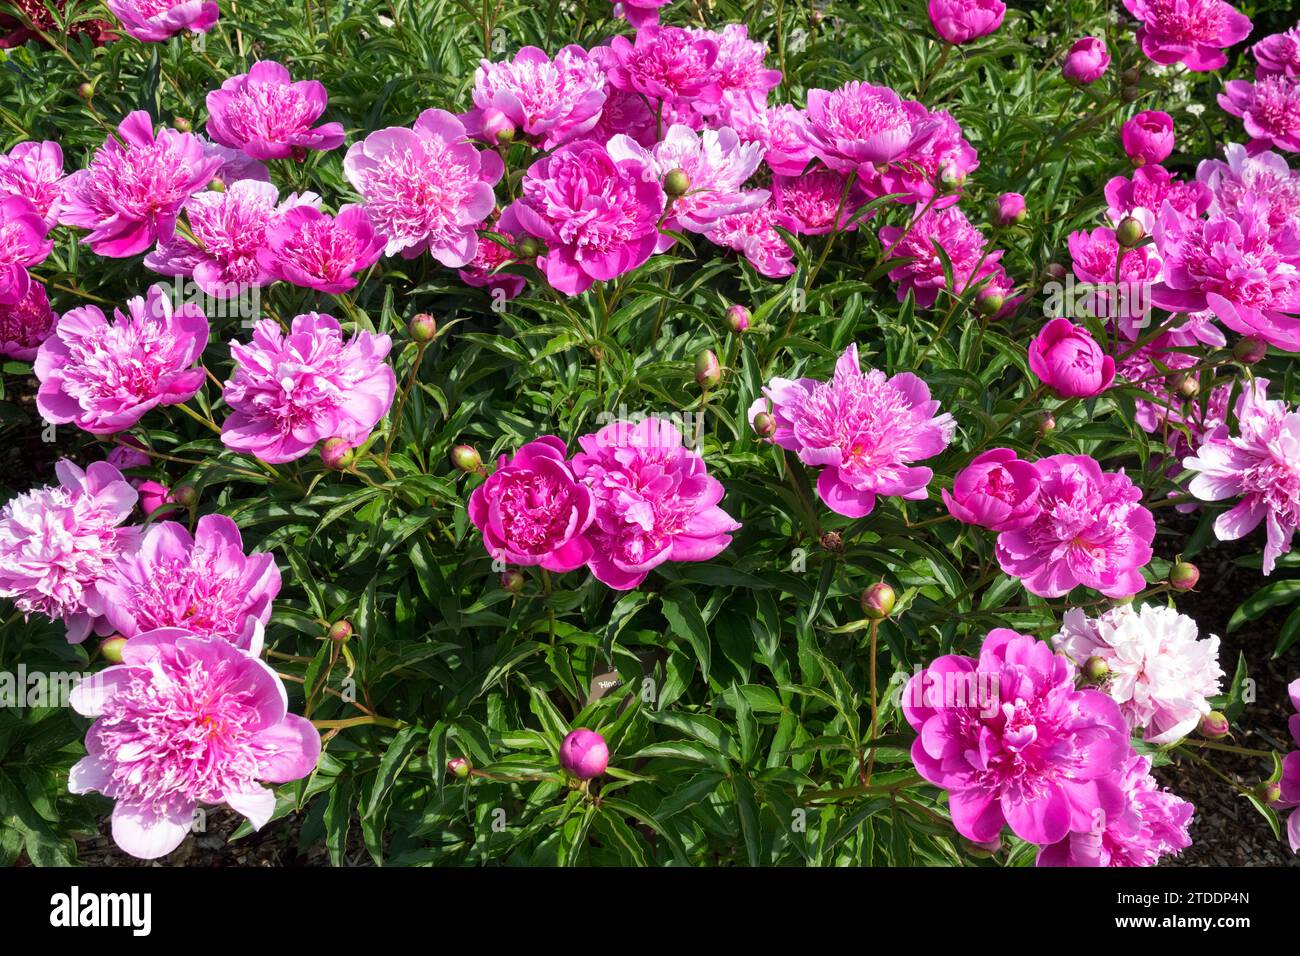 Pink, Chinese peony, Paeonia, Flowers, Peony, Herbaceous, Peonies, blooms, Paeonia lactiflora in Garden Stock Photo